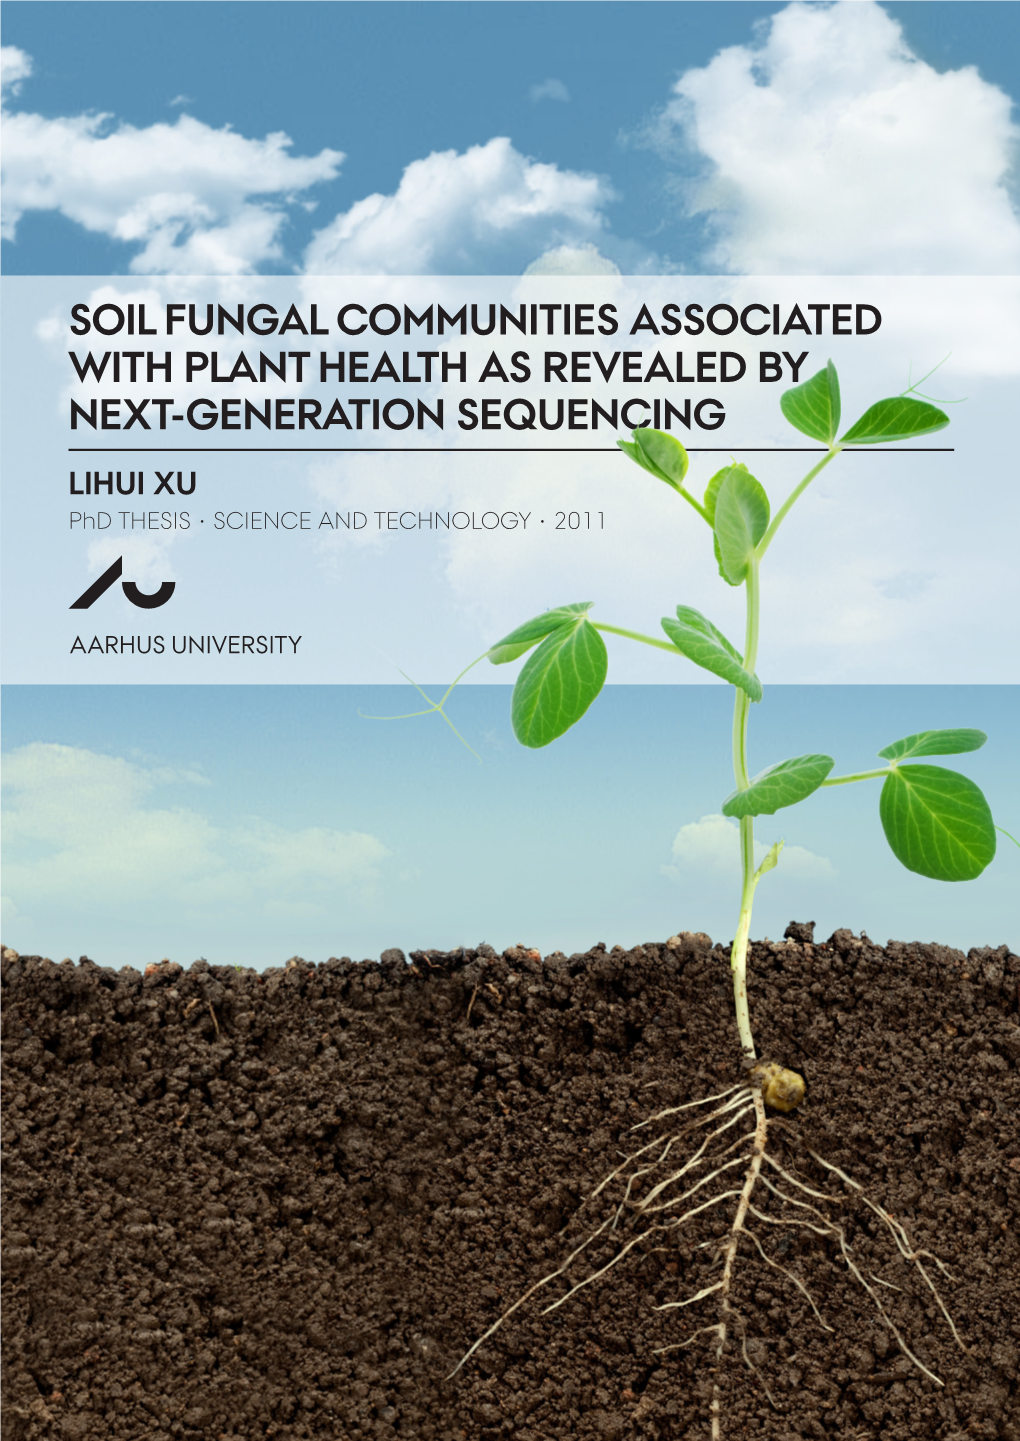 Soil Fungal Communities Associated with Plant Health As Revealed By